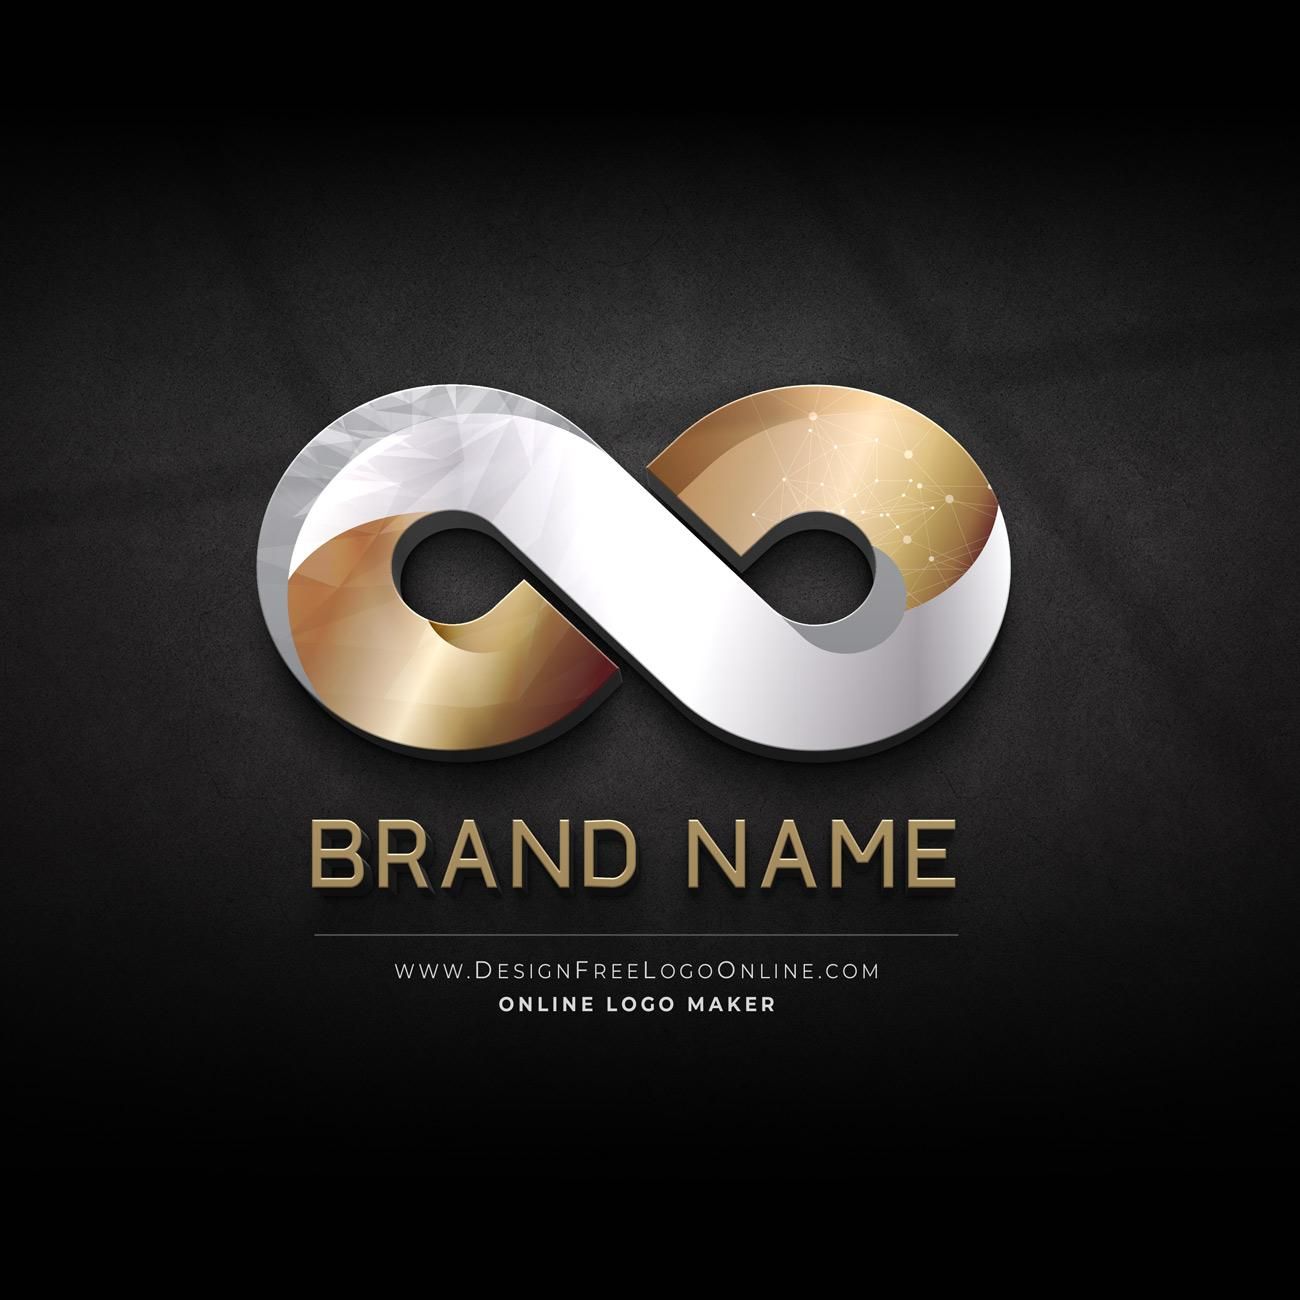 Create a logo with the infinity symbol